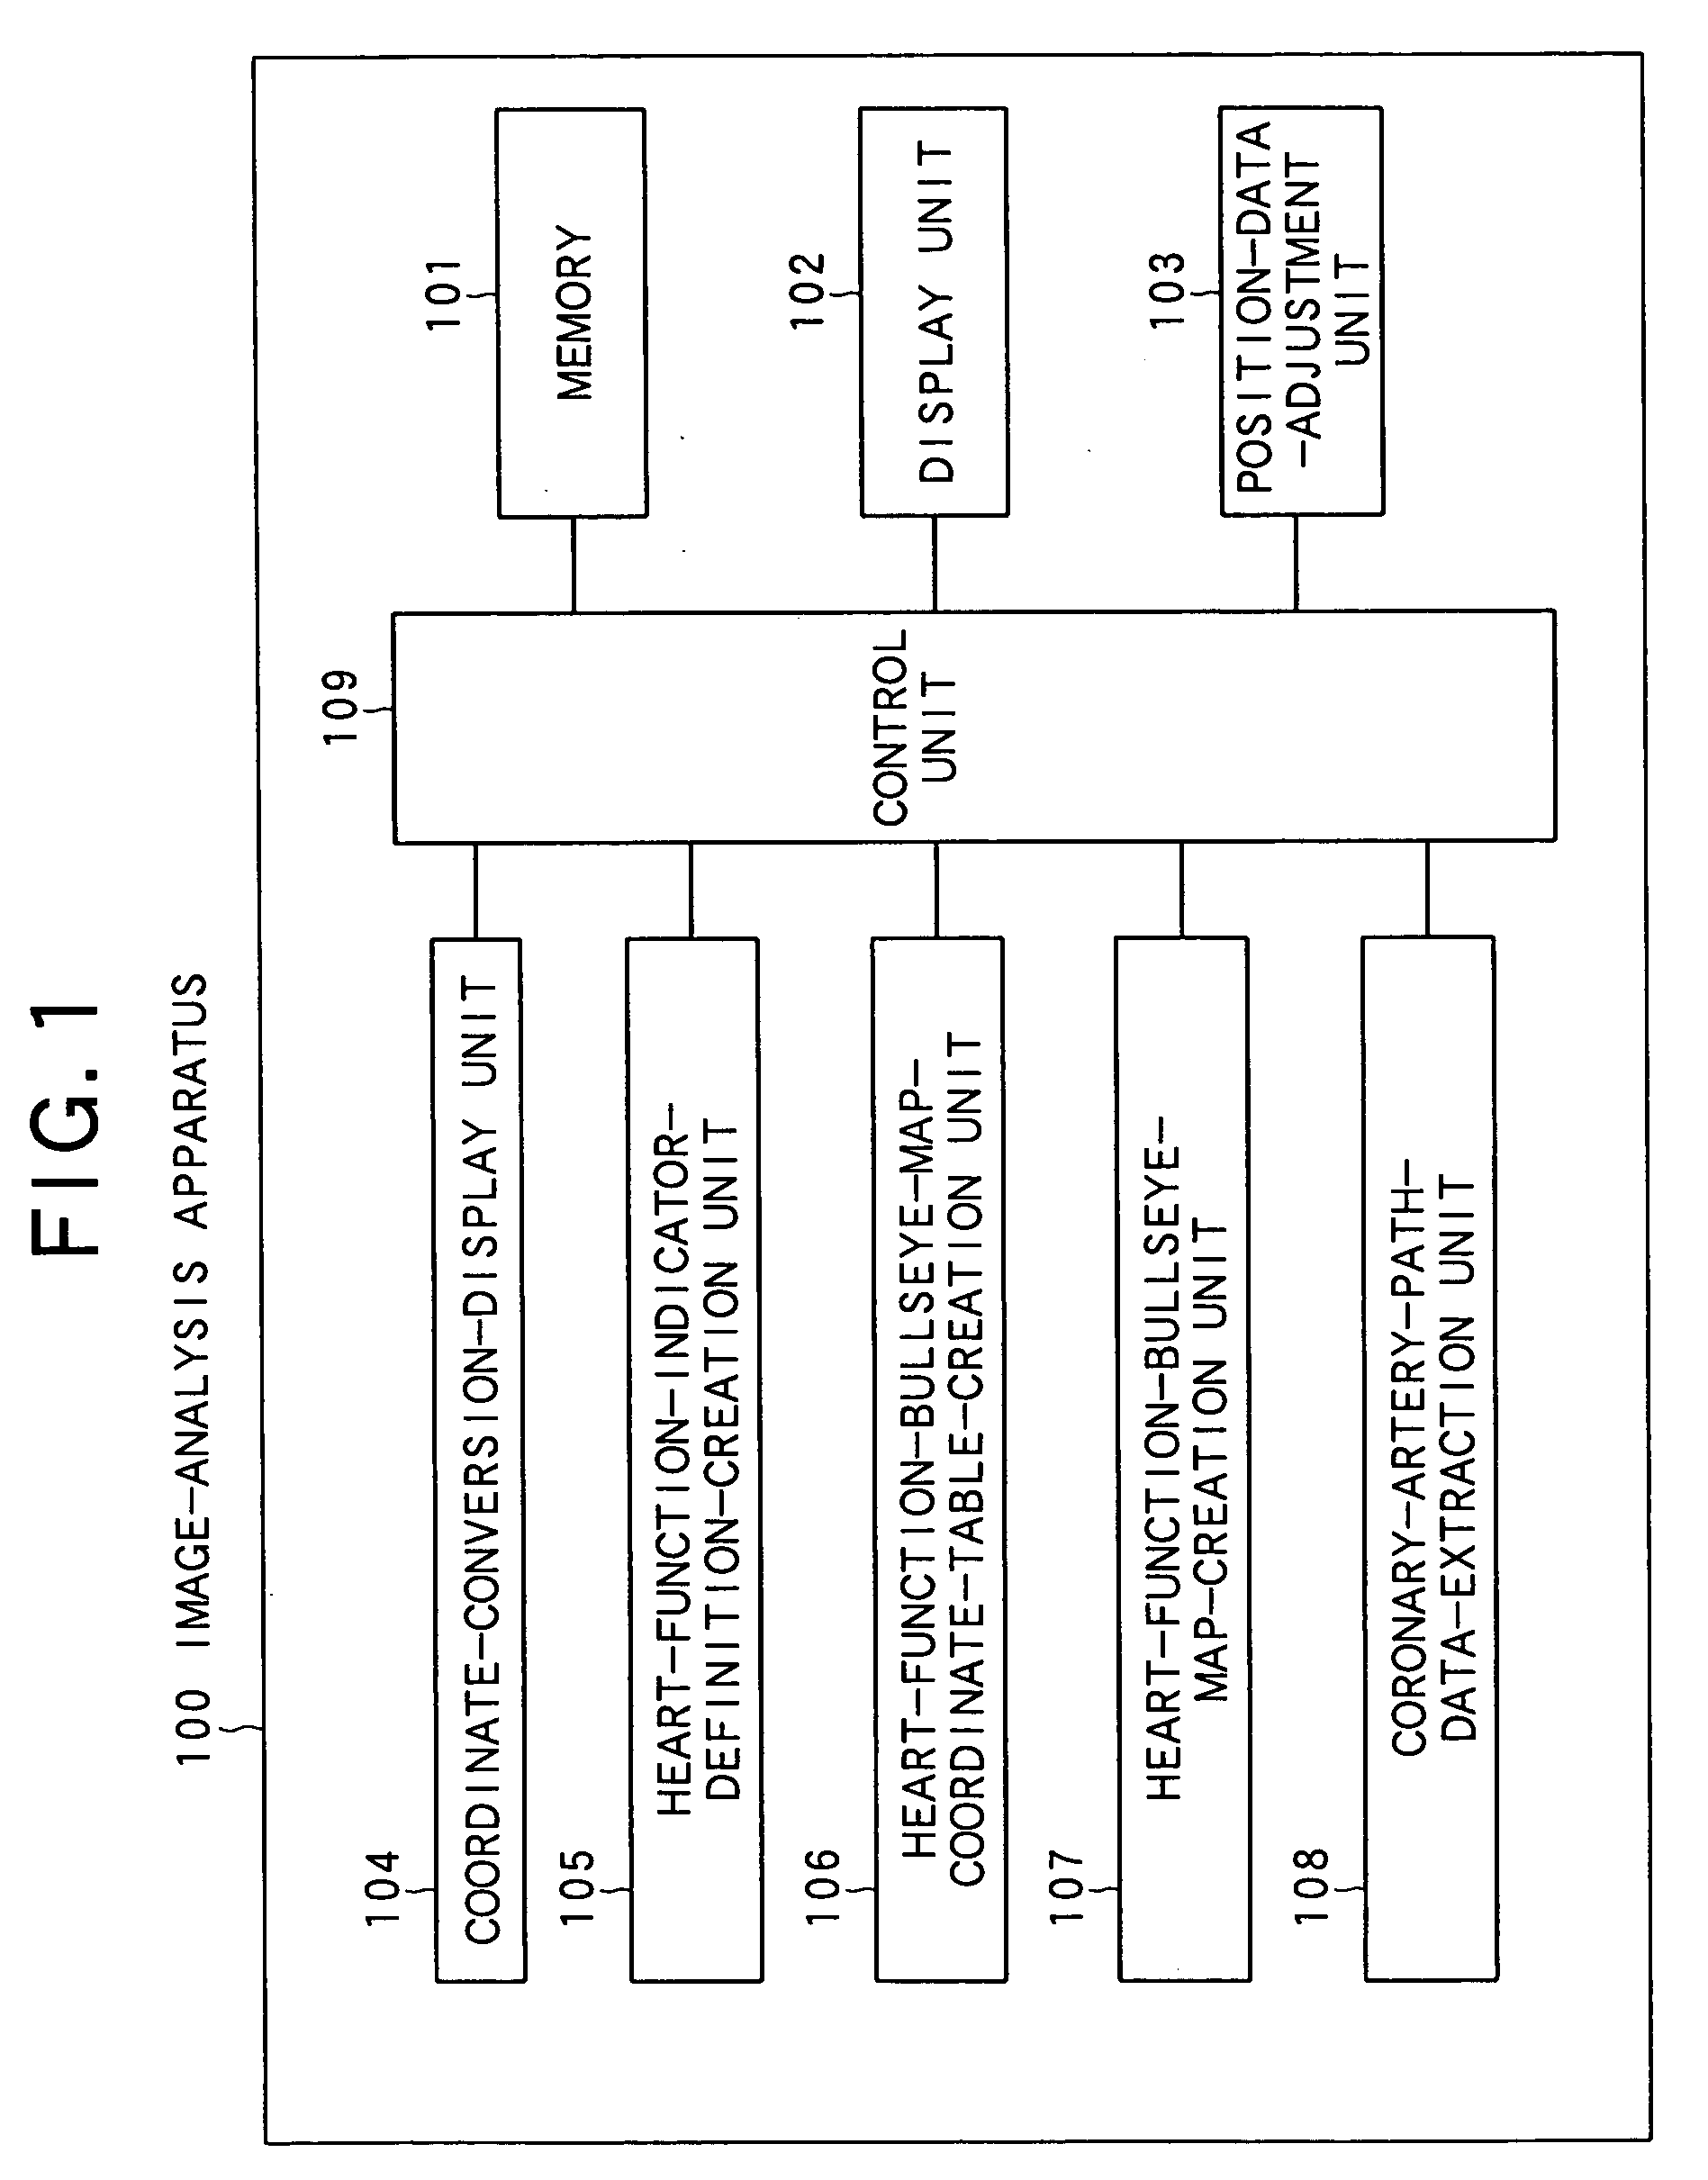 Image analysis apparatus, recording medium on which an image analysis program is recorded, and an image analysis method